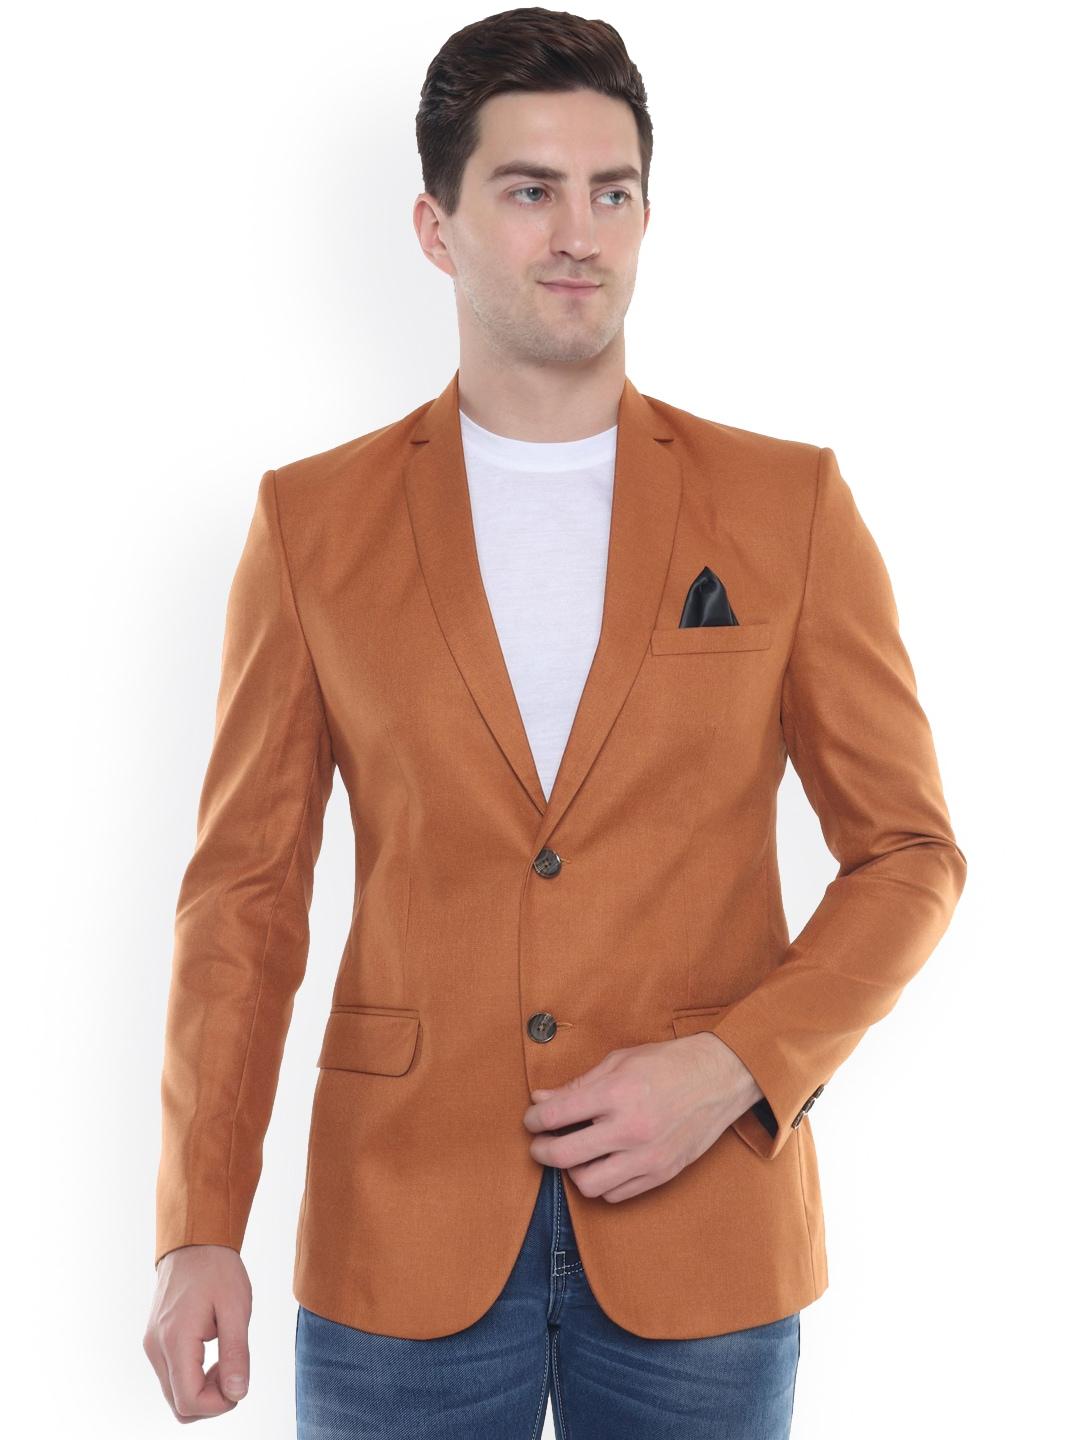 dkgf fashion men mustard solid single-breasted party blazers